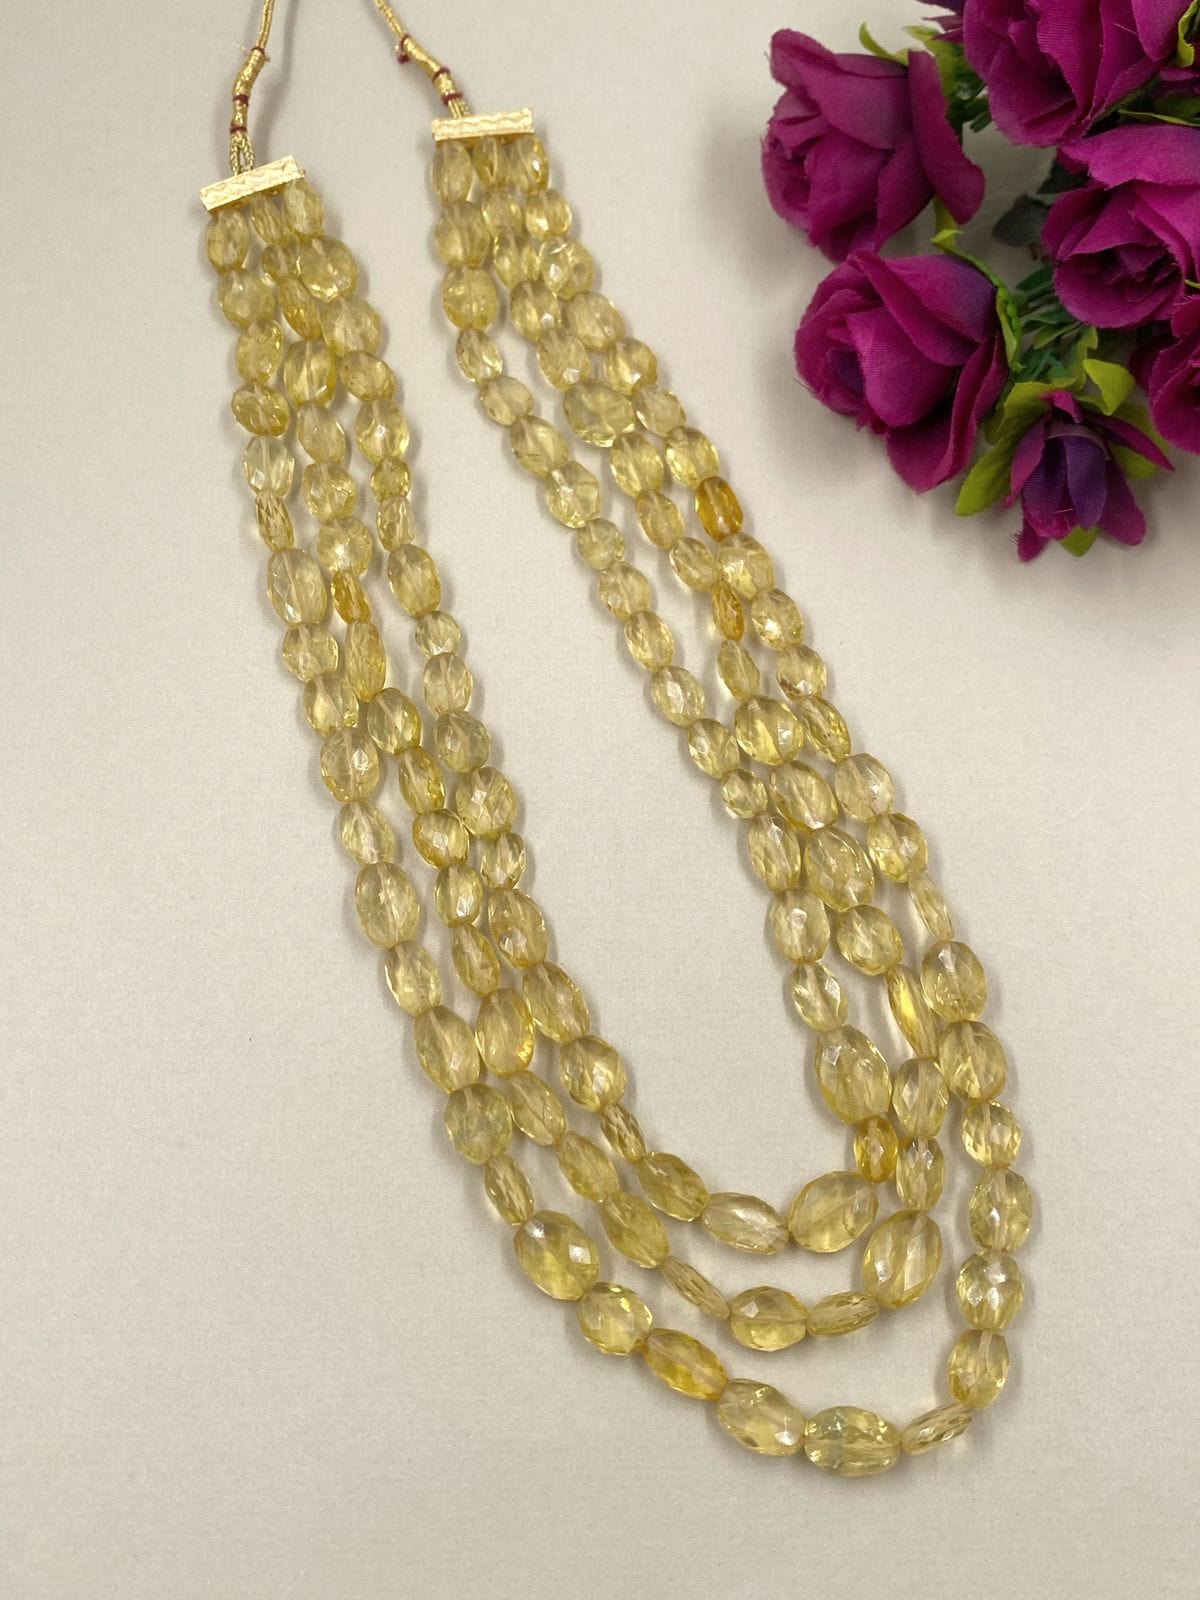 Semi Precious Layered Yellow Citrine Beads Necklace By Gehna Shop Beads Jewellery